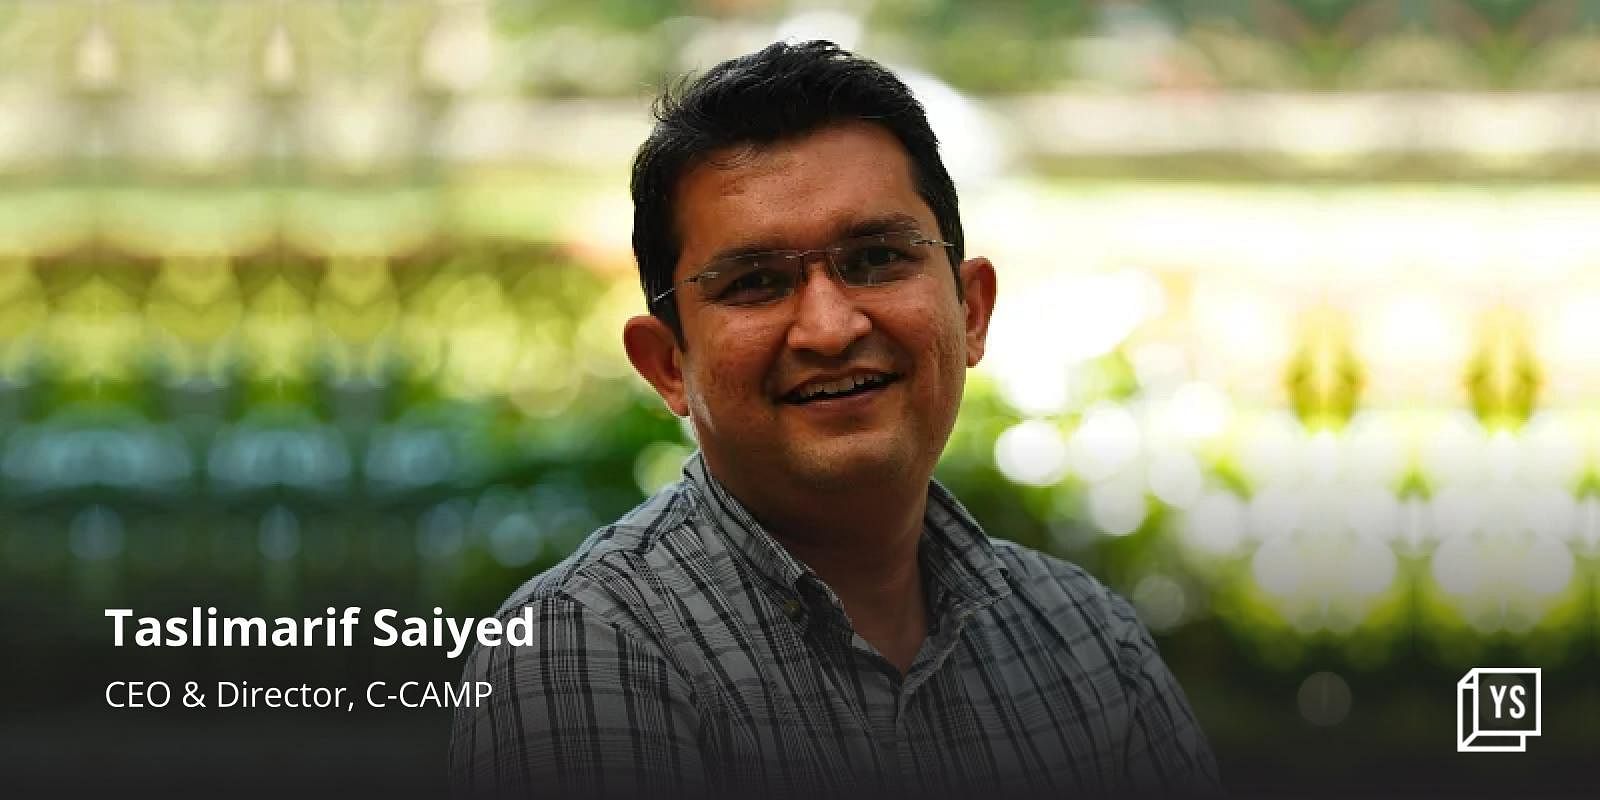 The great Indian bioeconomy: C-CAMP CEO on biotech startups and societal impact 